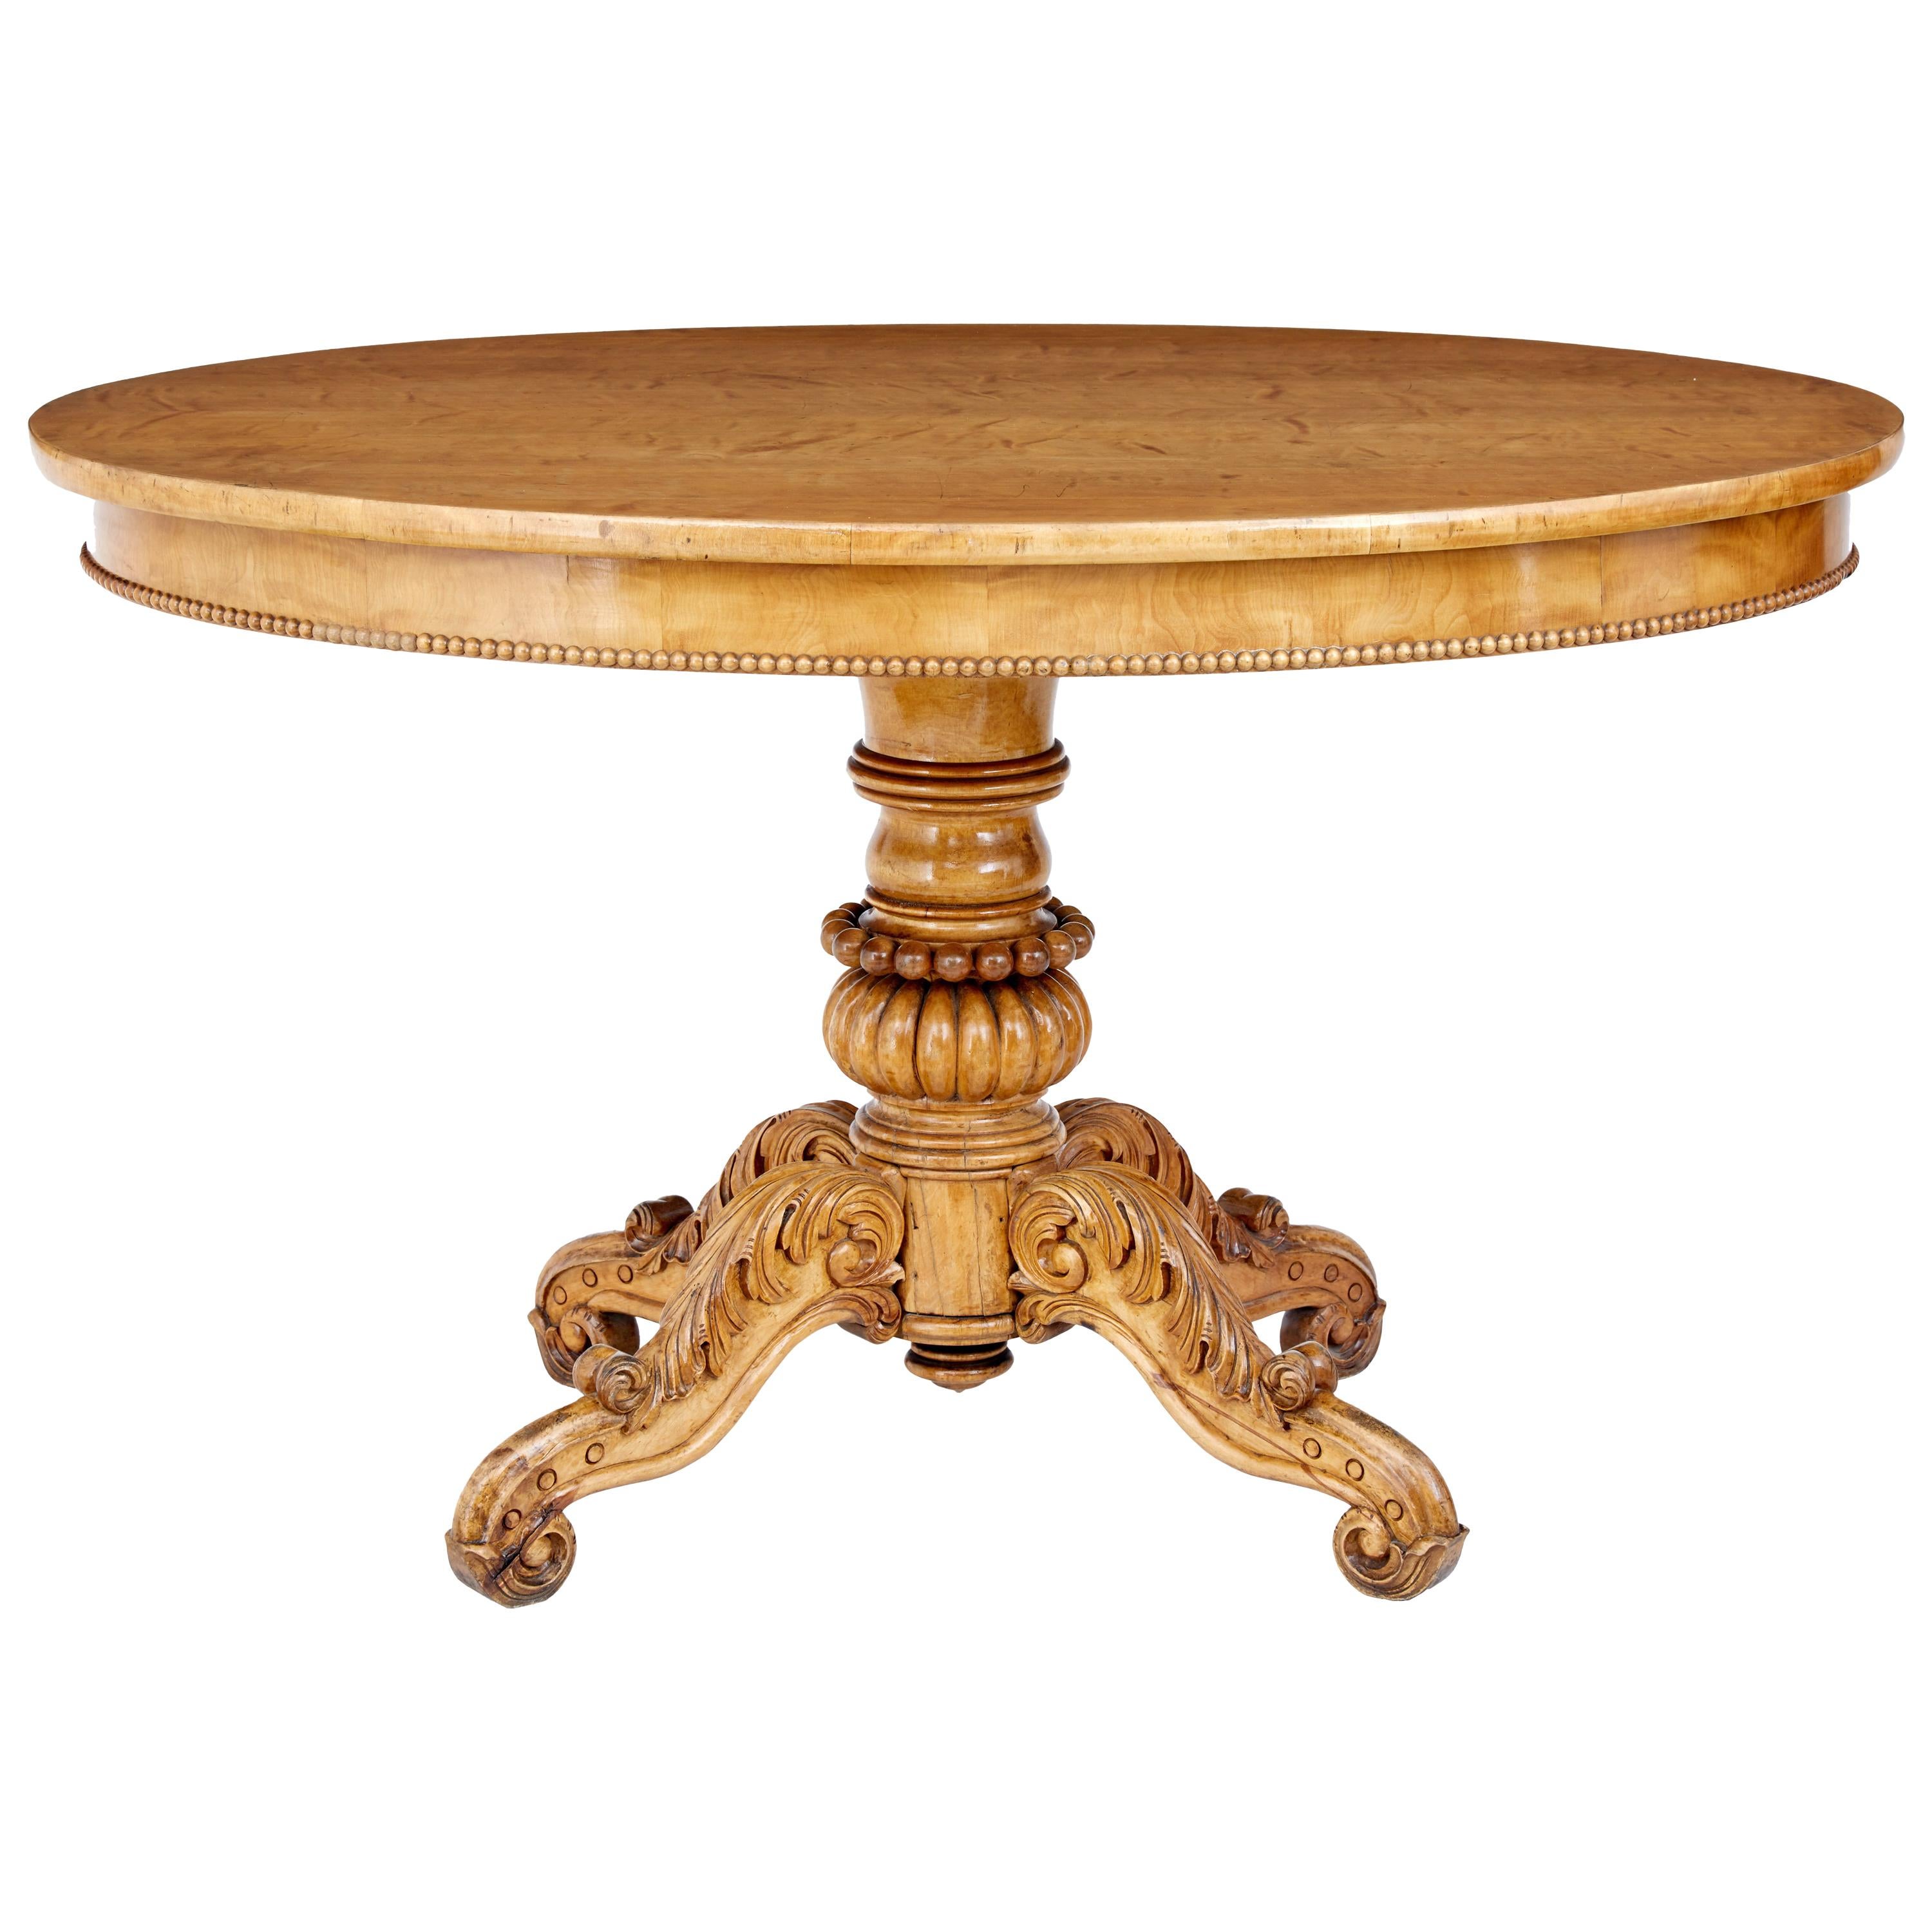 19th Century Swedish Carved Birch Oval Centre Table